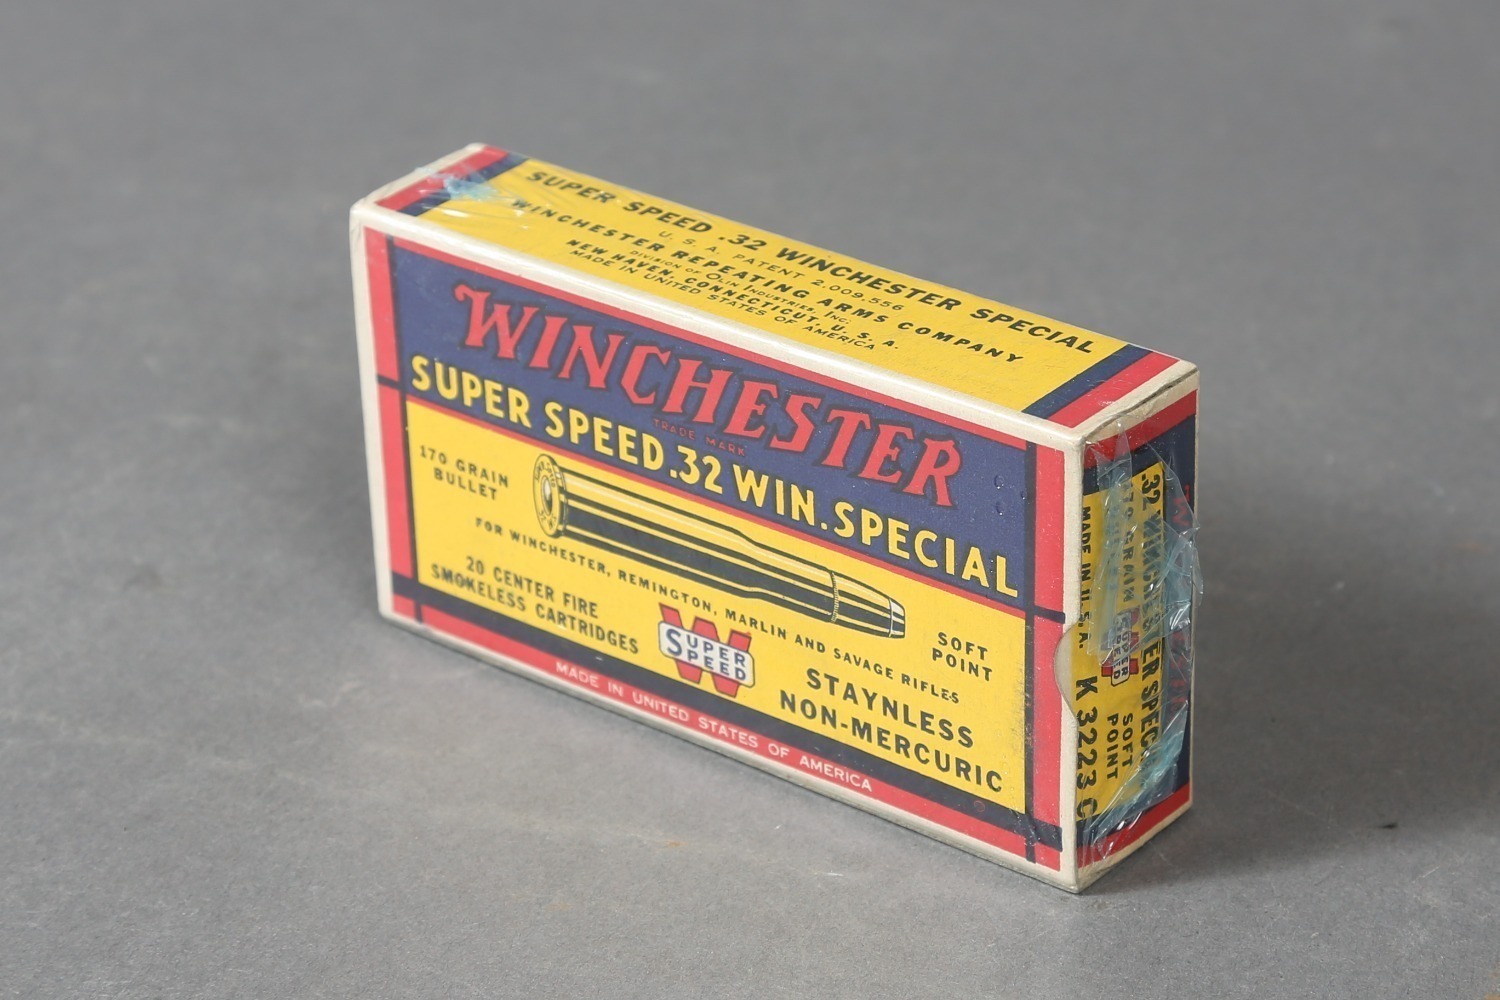 1 Bx Vintage Winchester .32 Win Spcl Ammo